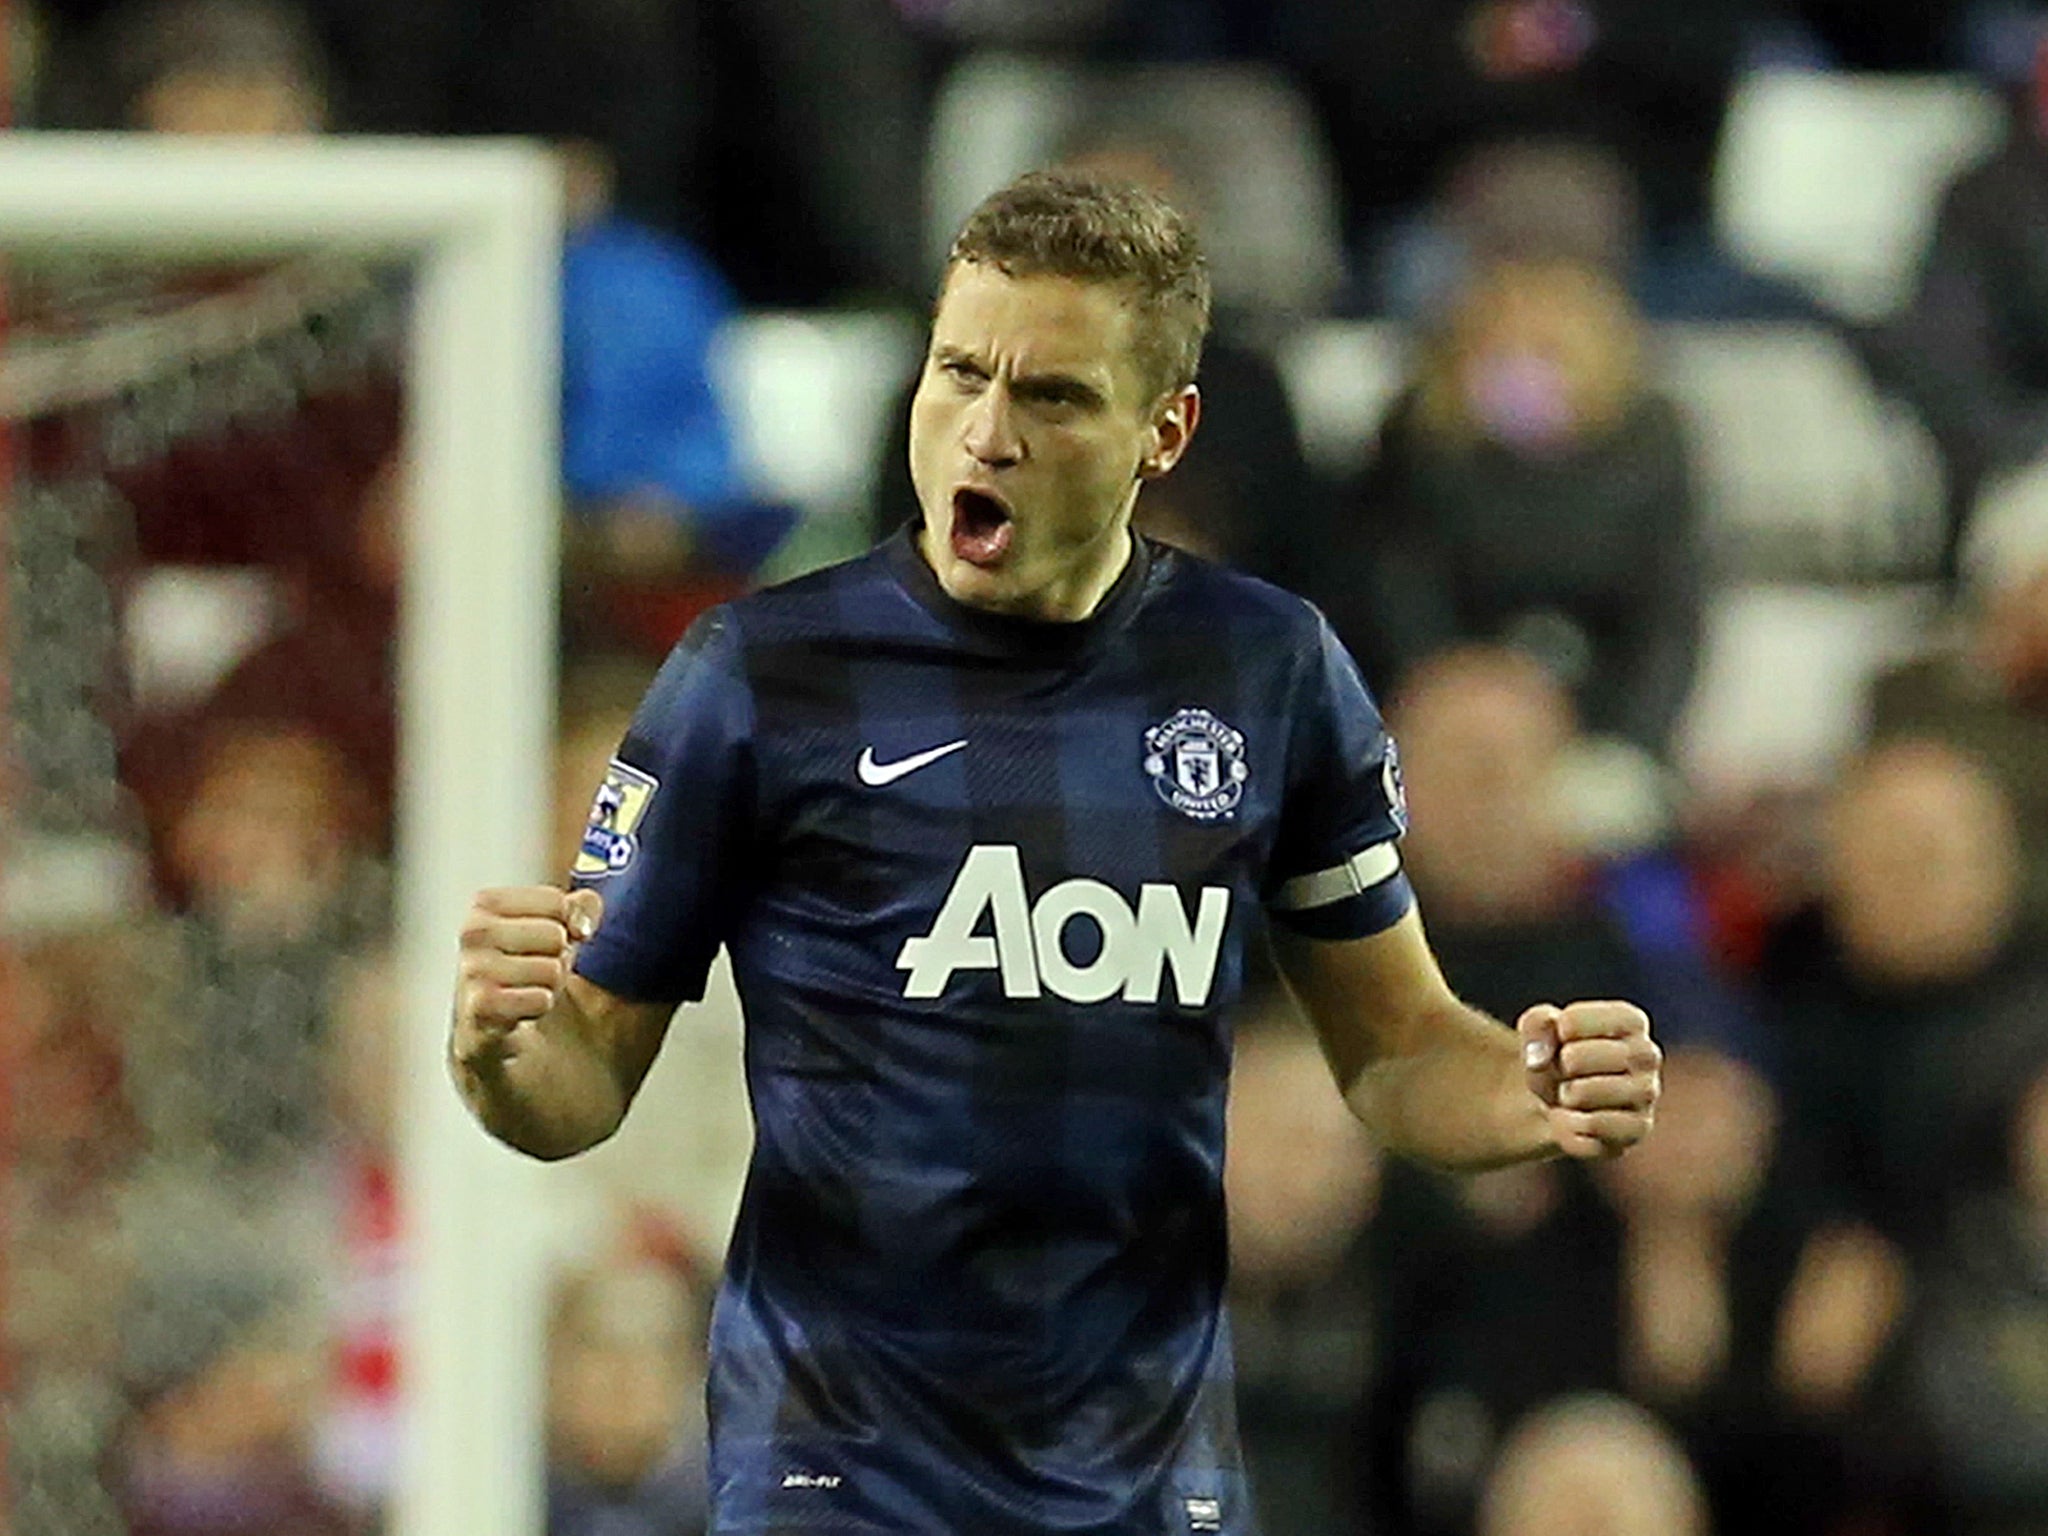 Nemanja Vidic has claimed he will not give up on Manchester United's title chances